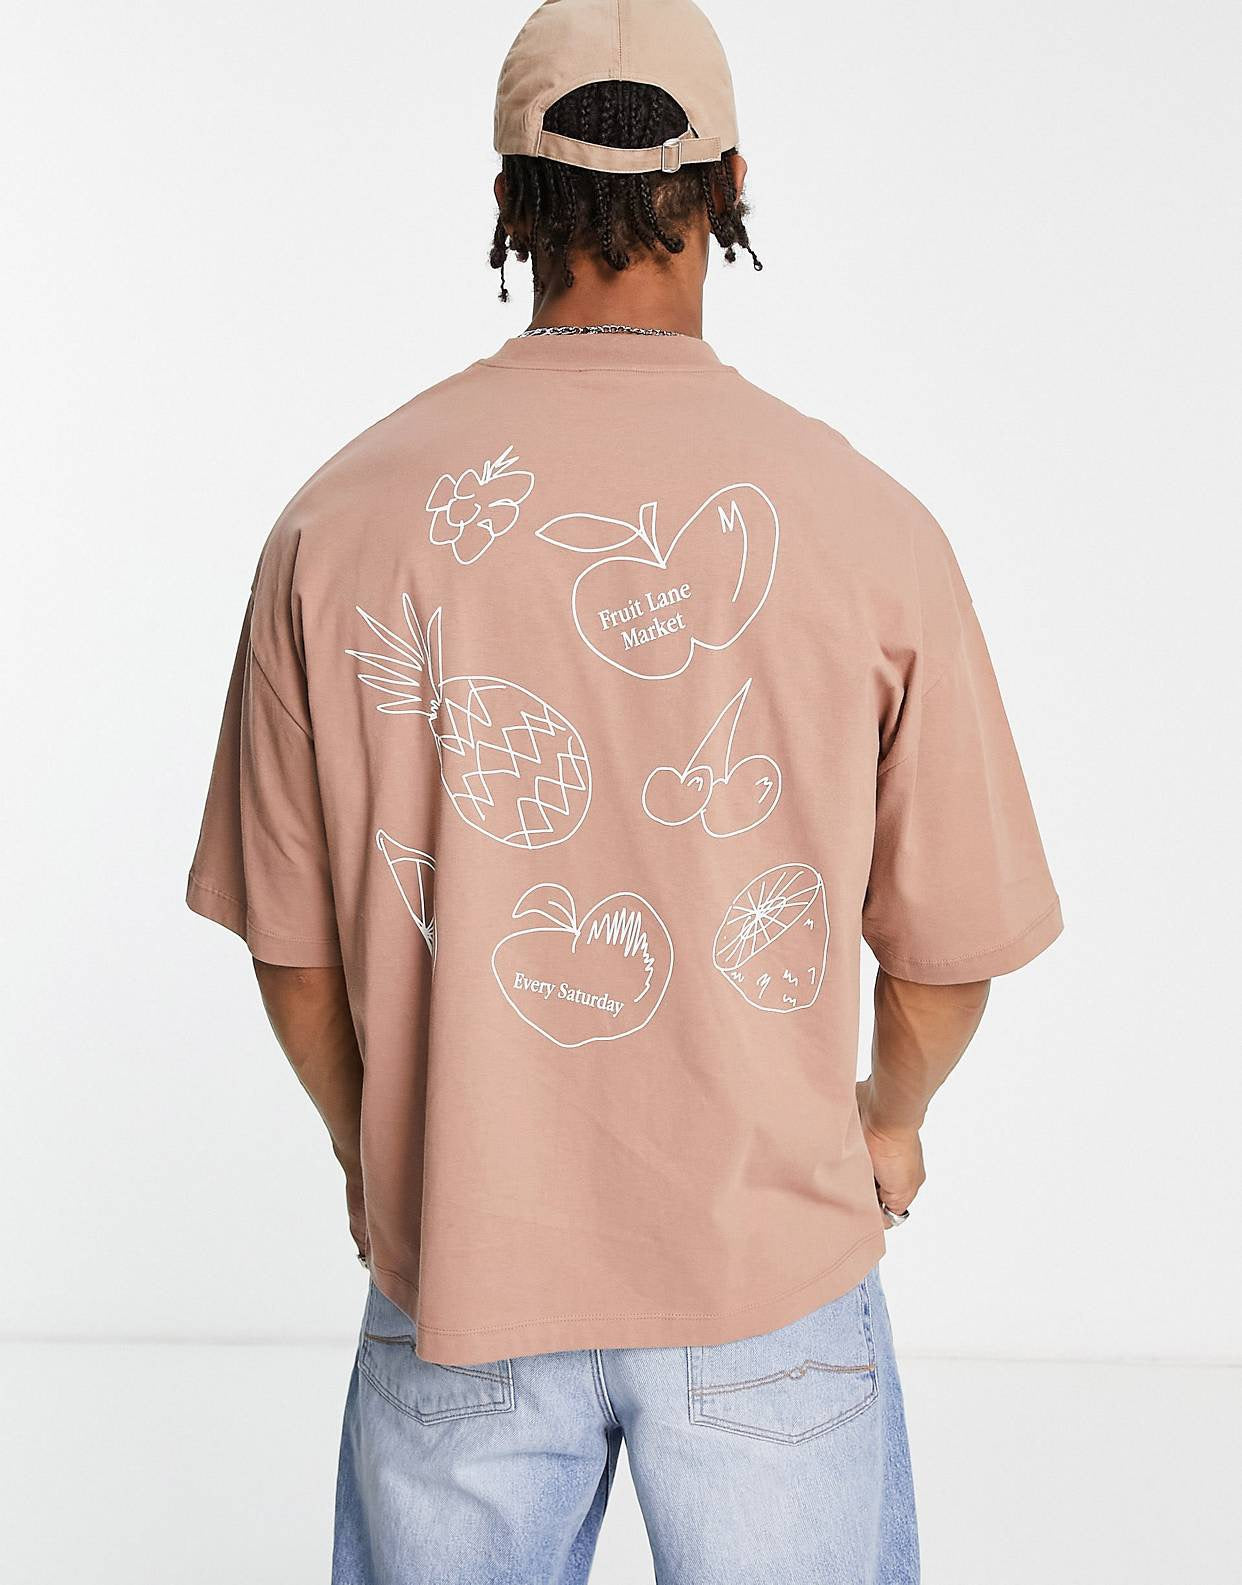 ASOS DESIGN oversized t-shirt in tan with line drawn fruity back print